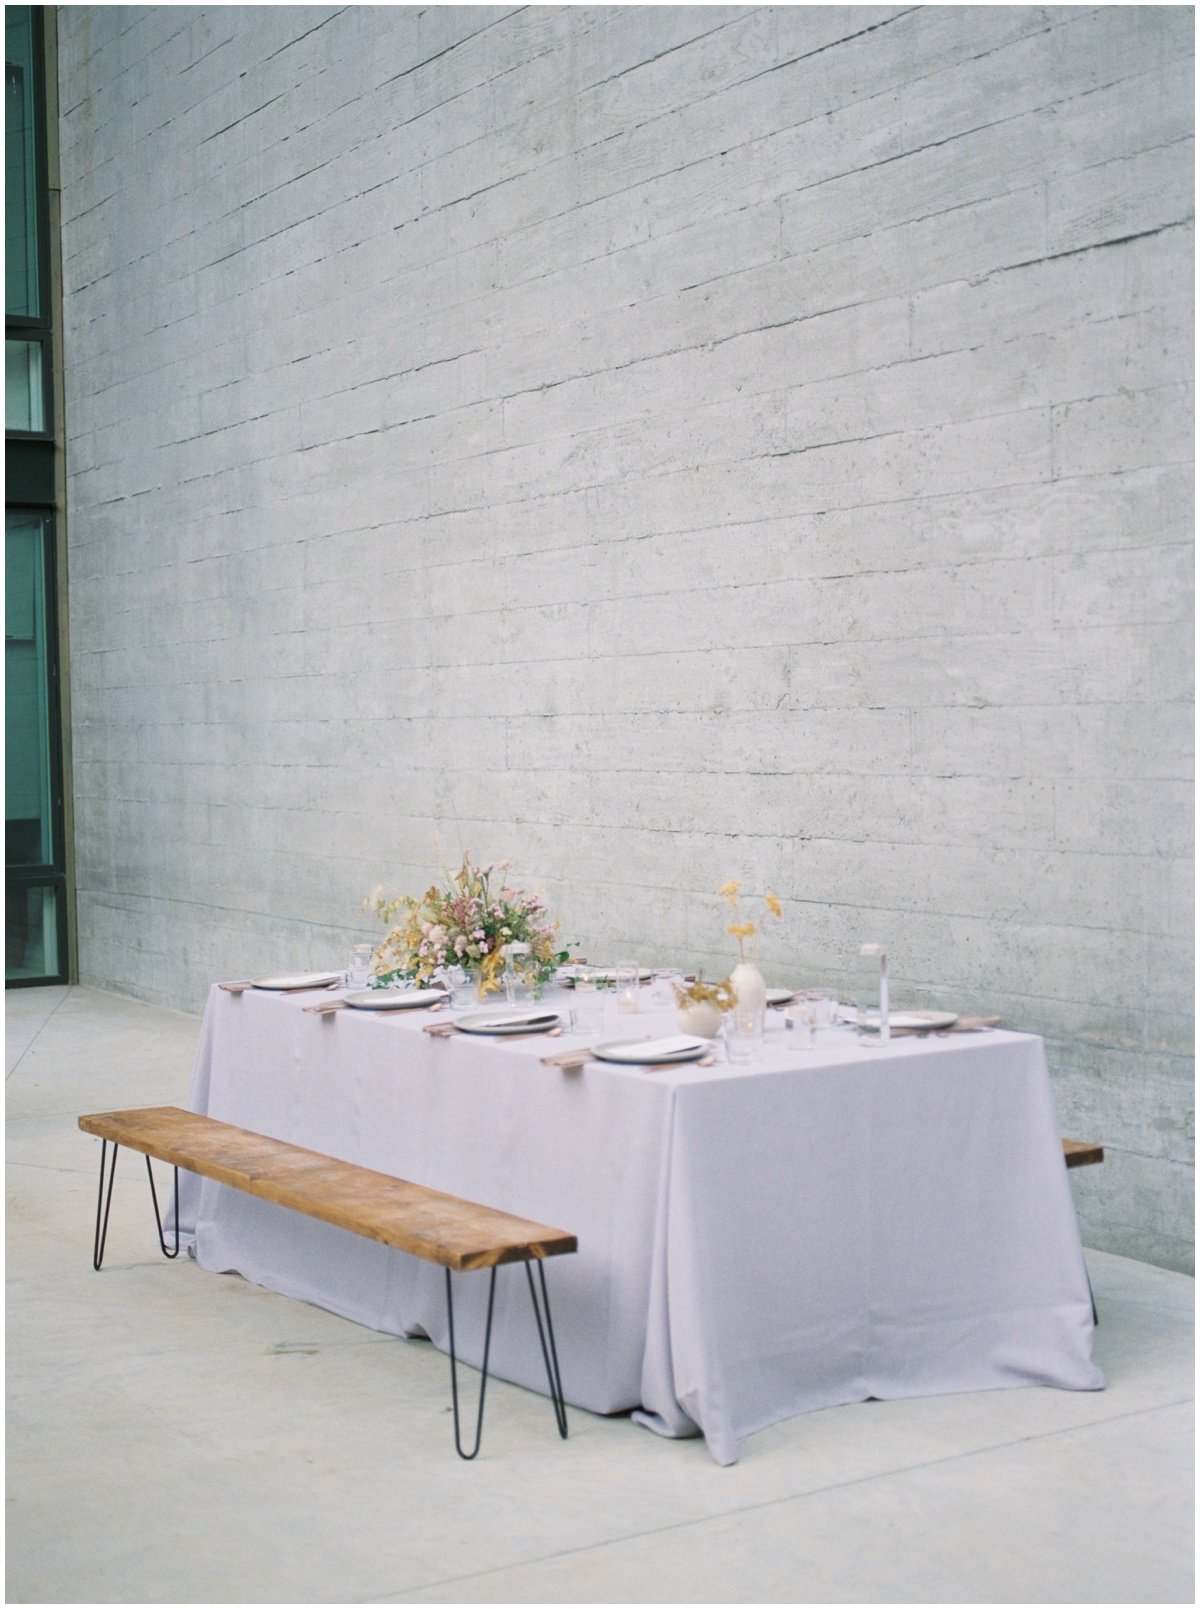 Pale purple table cloth with gold and purple floral arrangements with a wooden bench for seating | NKB Photo